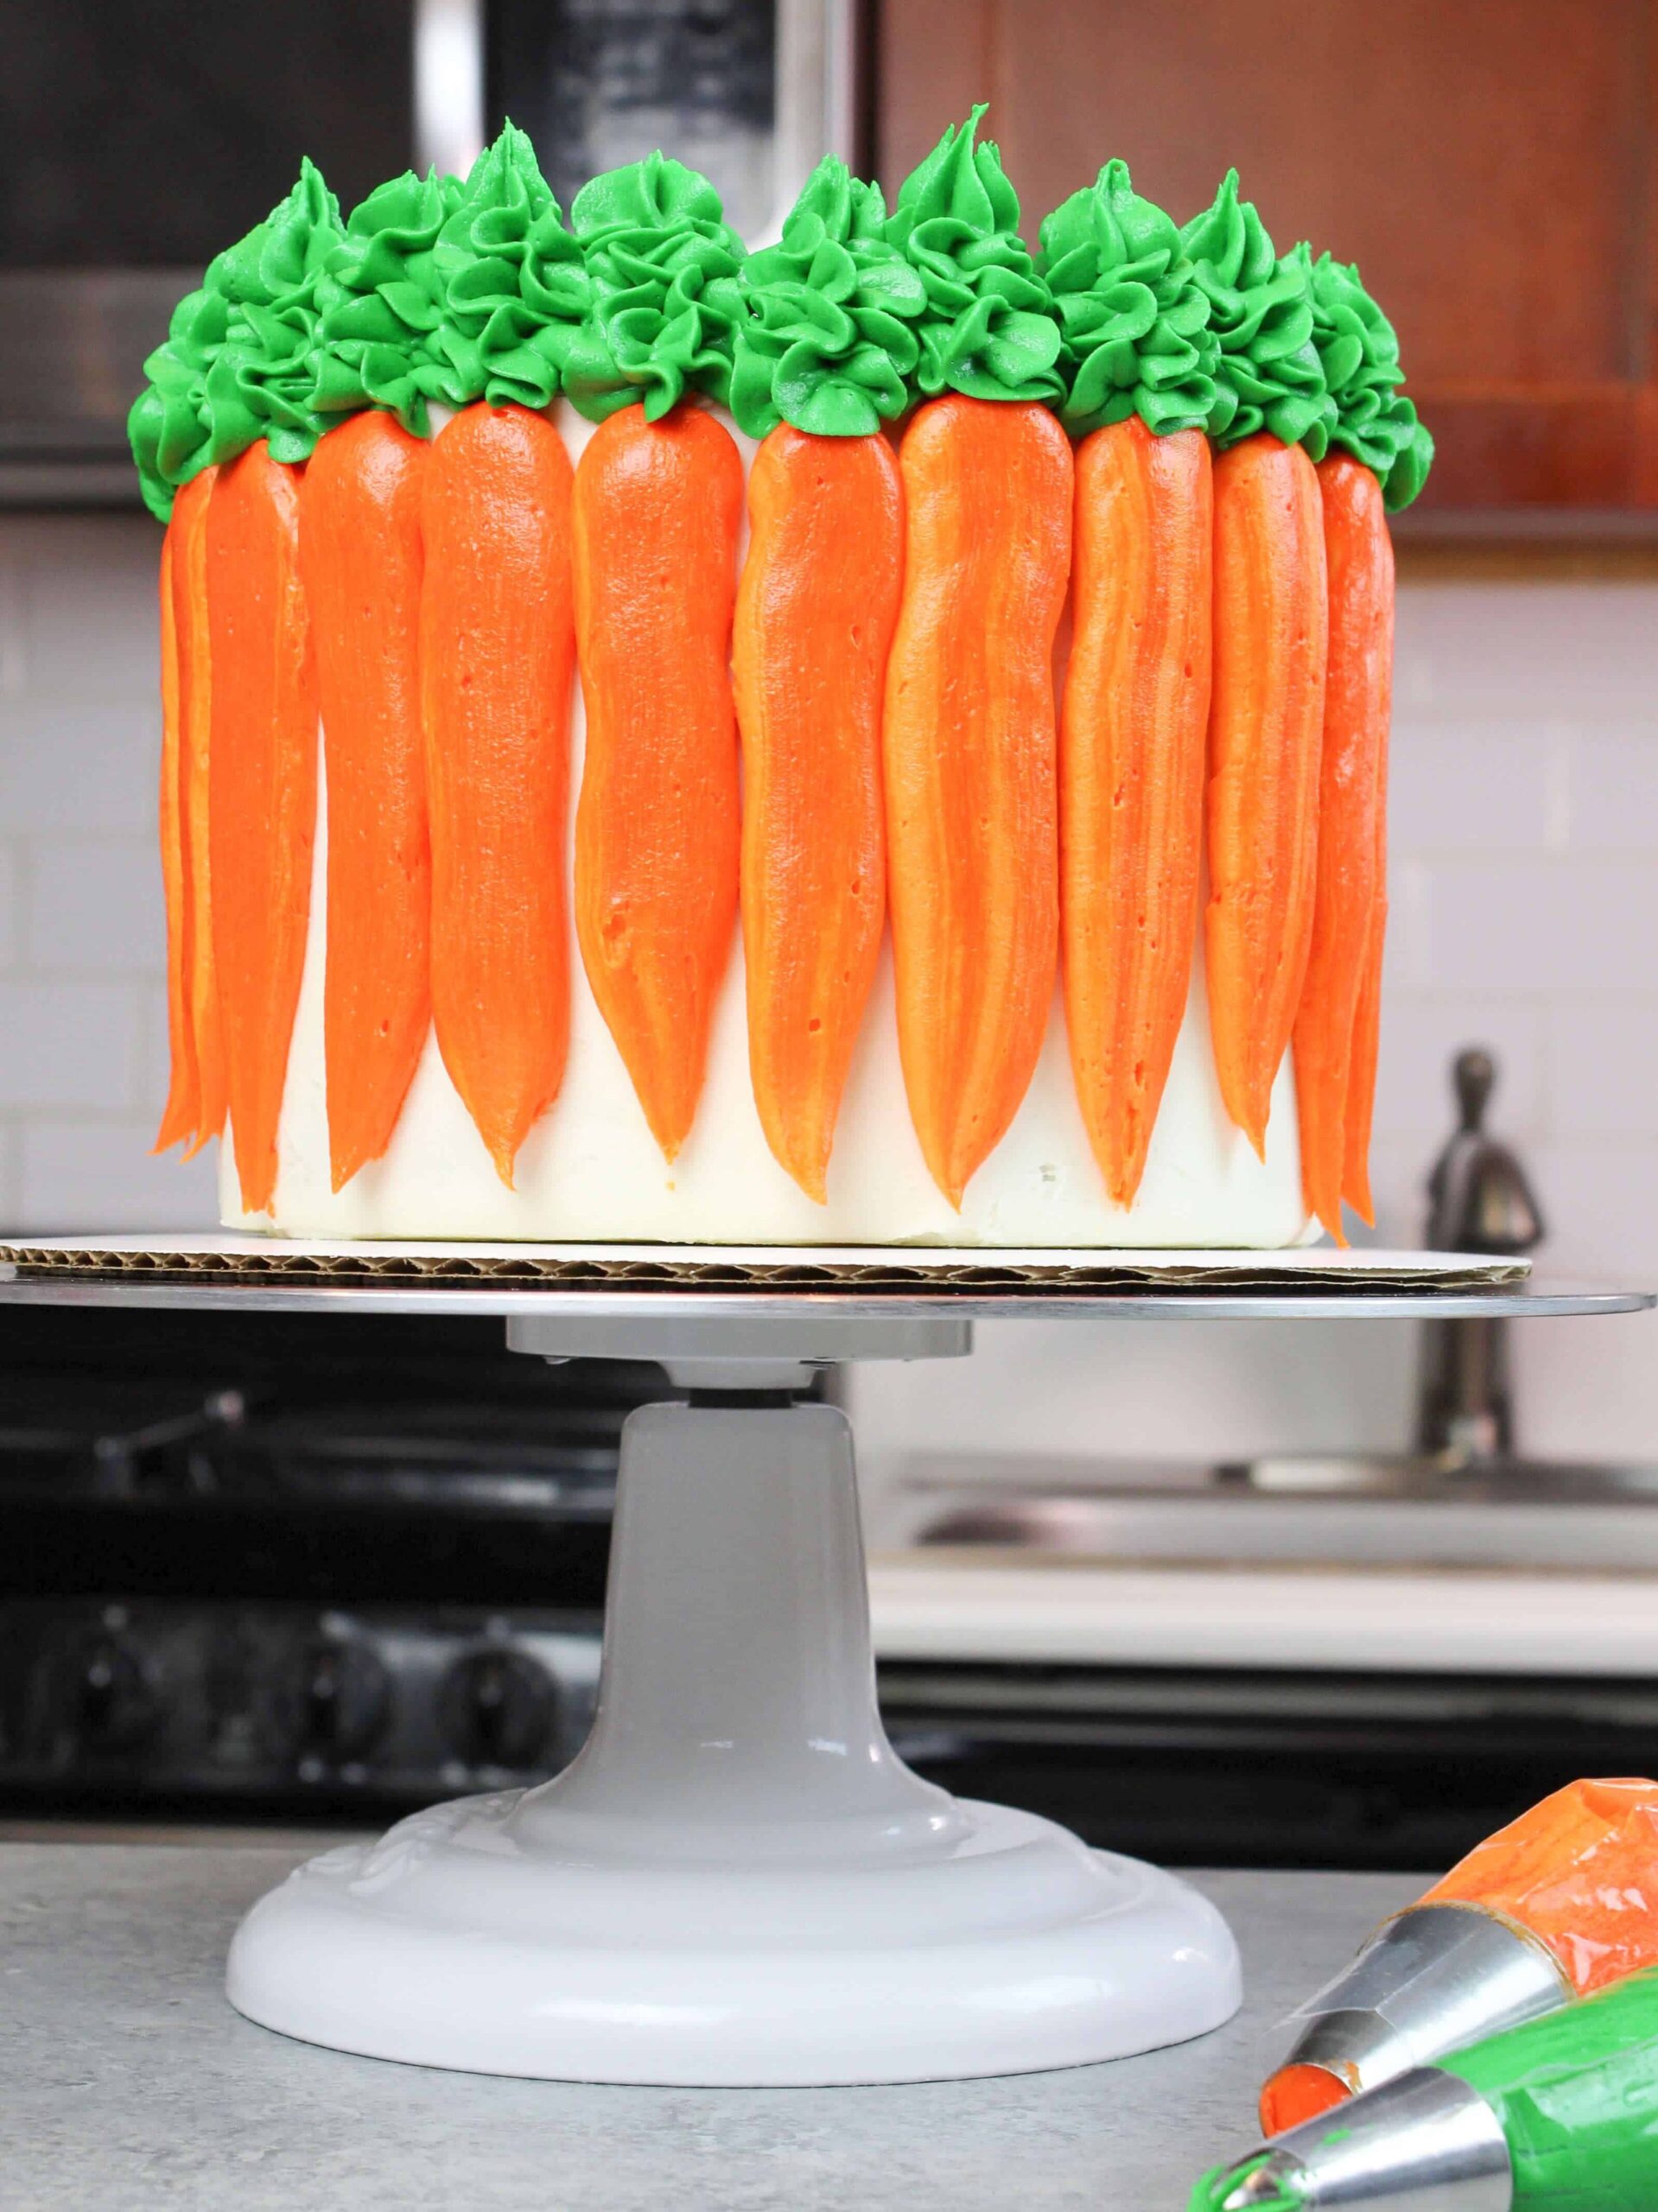 image of decorated carrot cake, with cream cheese frosting